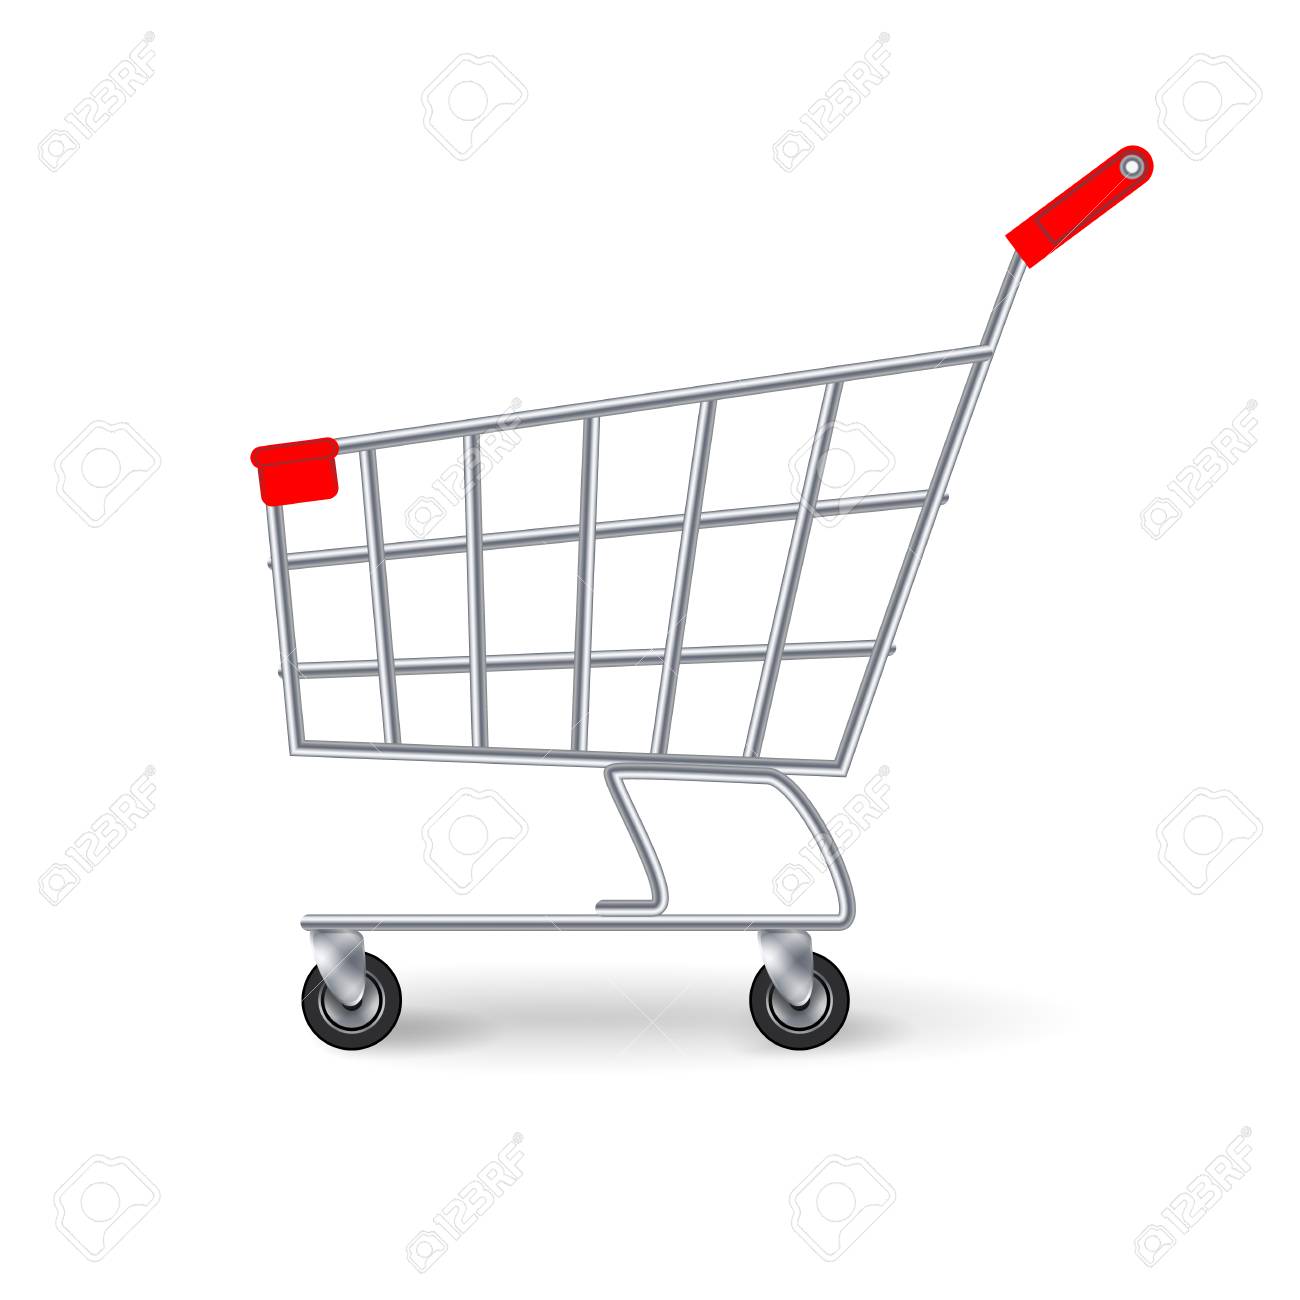 Free Cart Clipart empty shopping cart, Download Free Clip